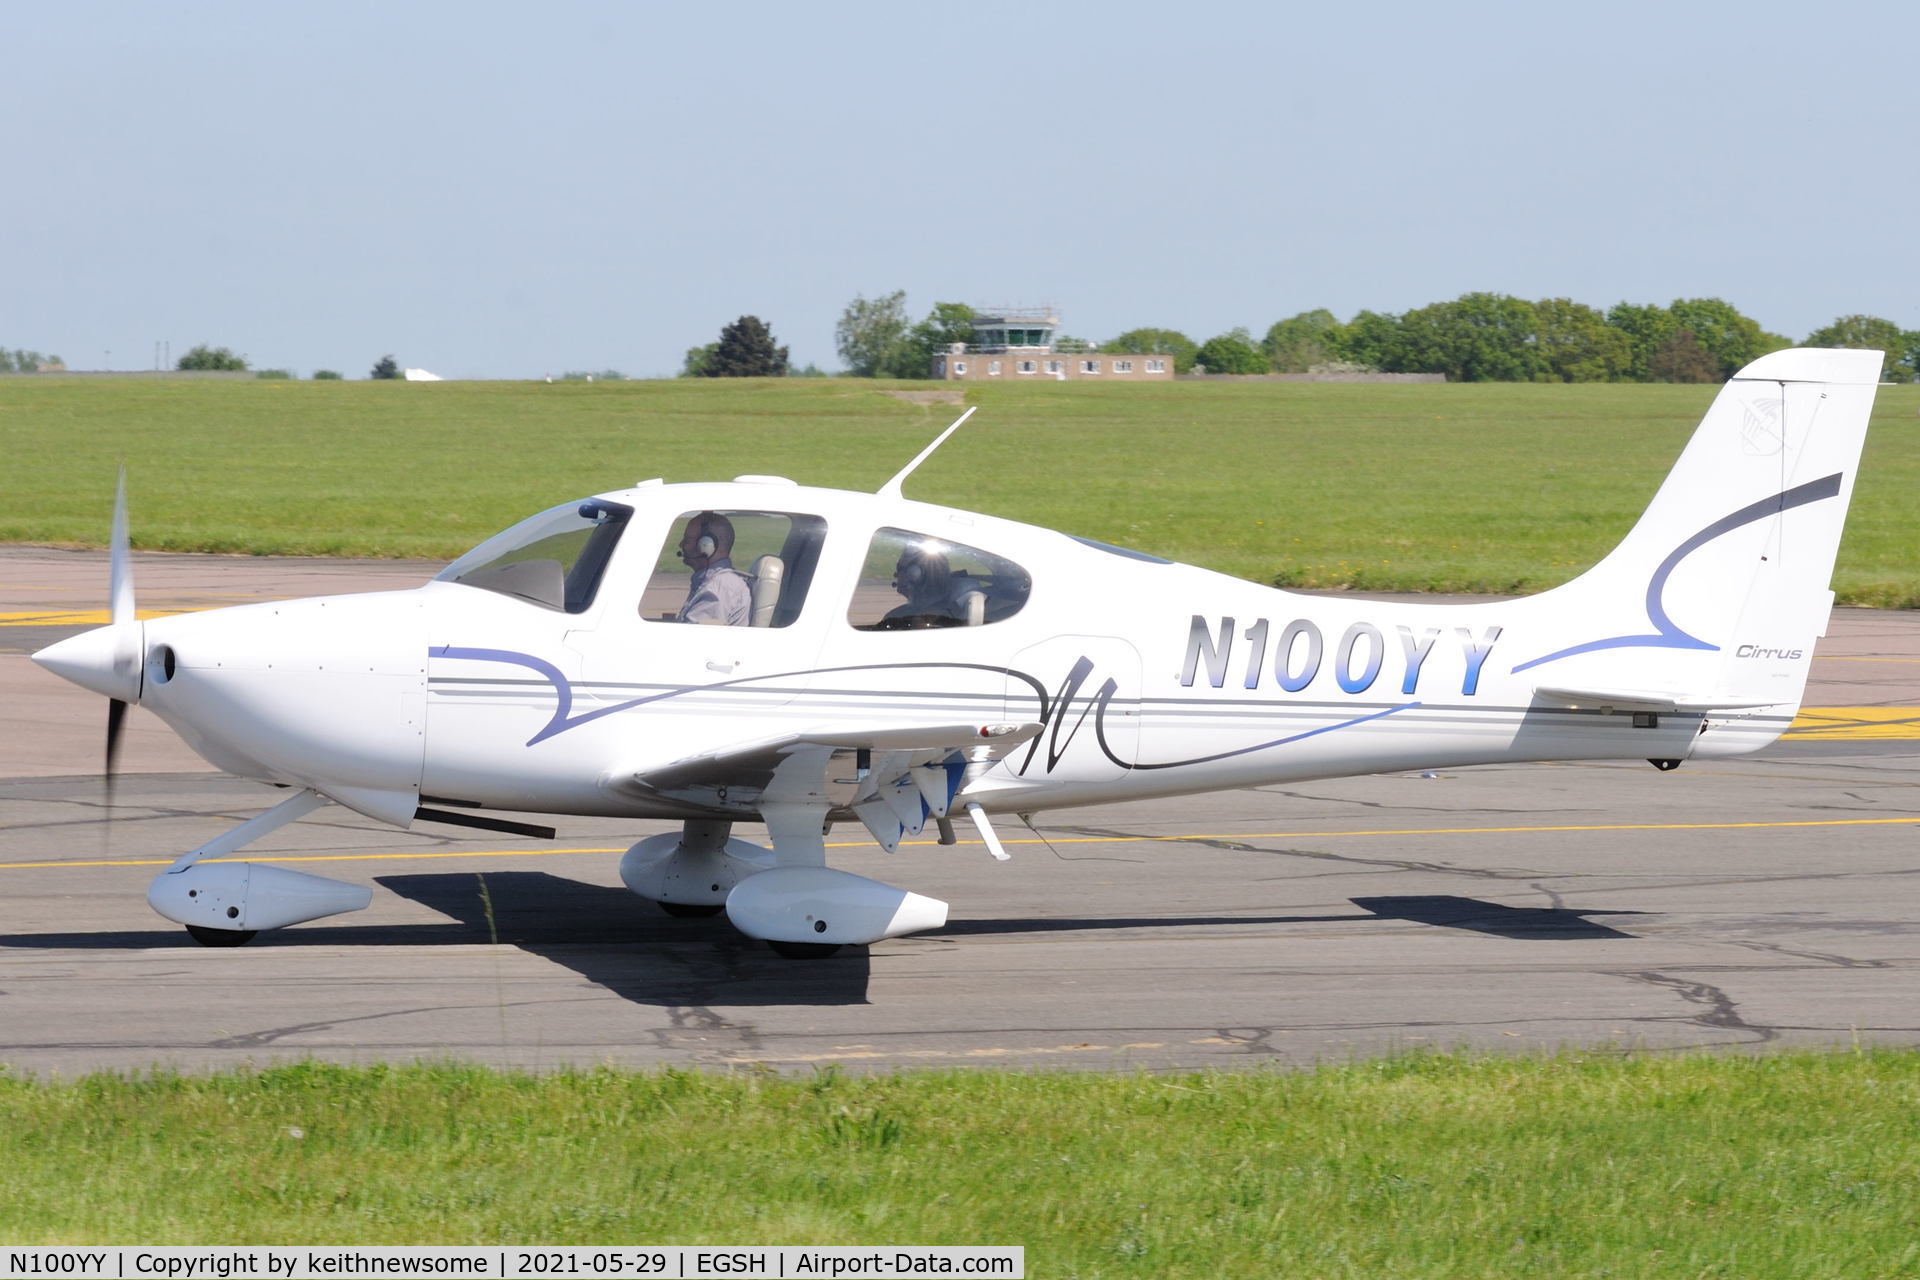 N100YY, 2002 Cirrus SR20 C/N 1183, Arriving at Norwich from Haverford West.